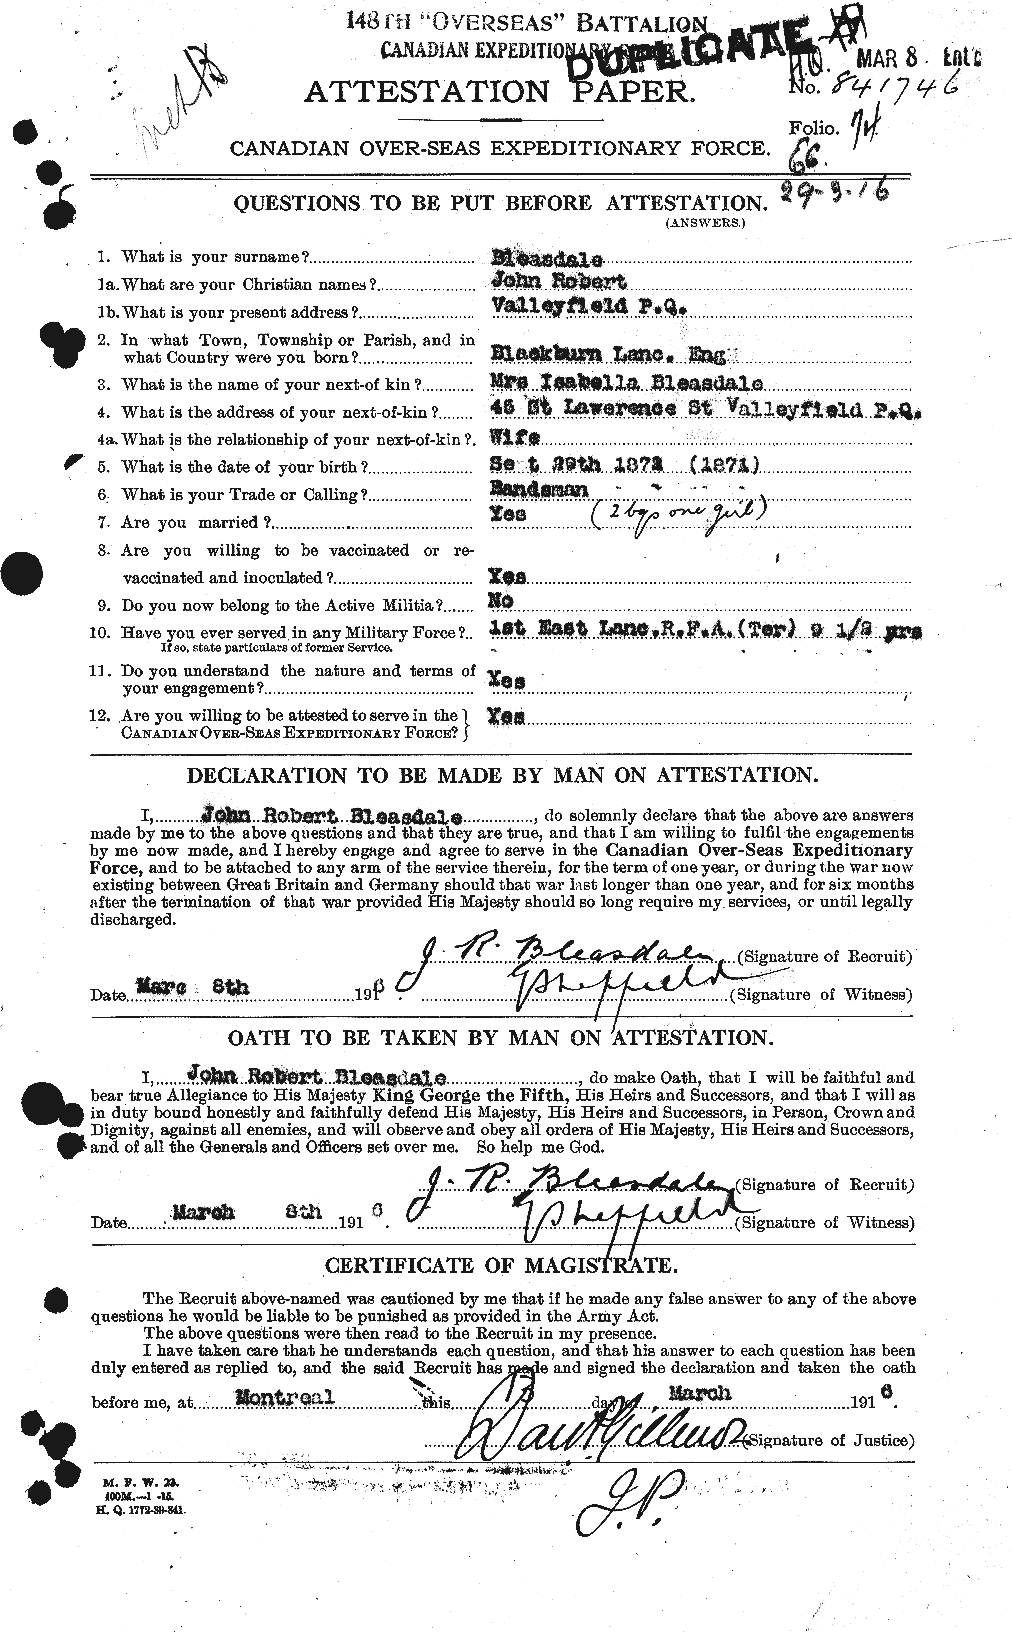 Personnel Records of the First World War - CEF 247914a